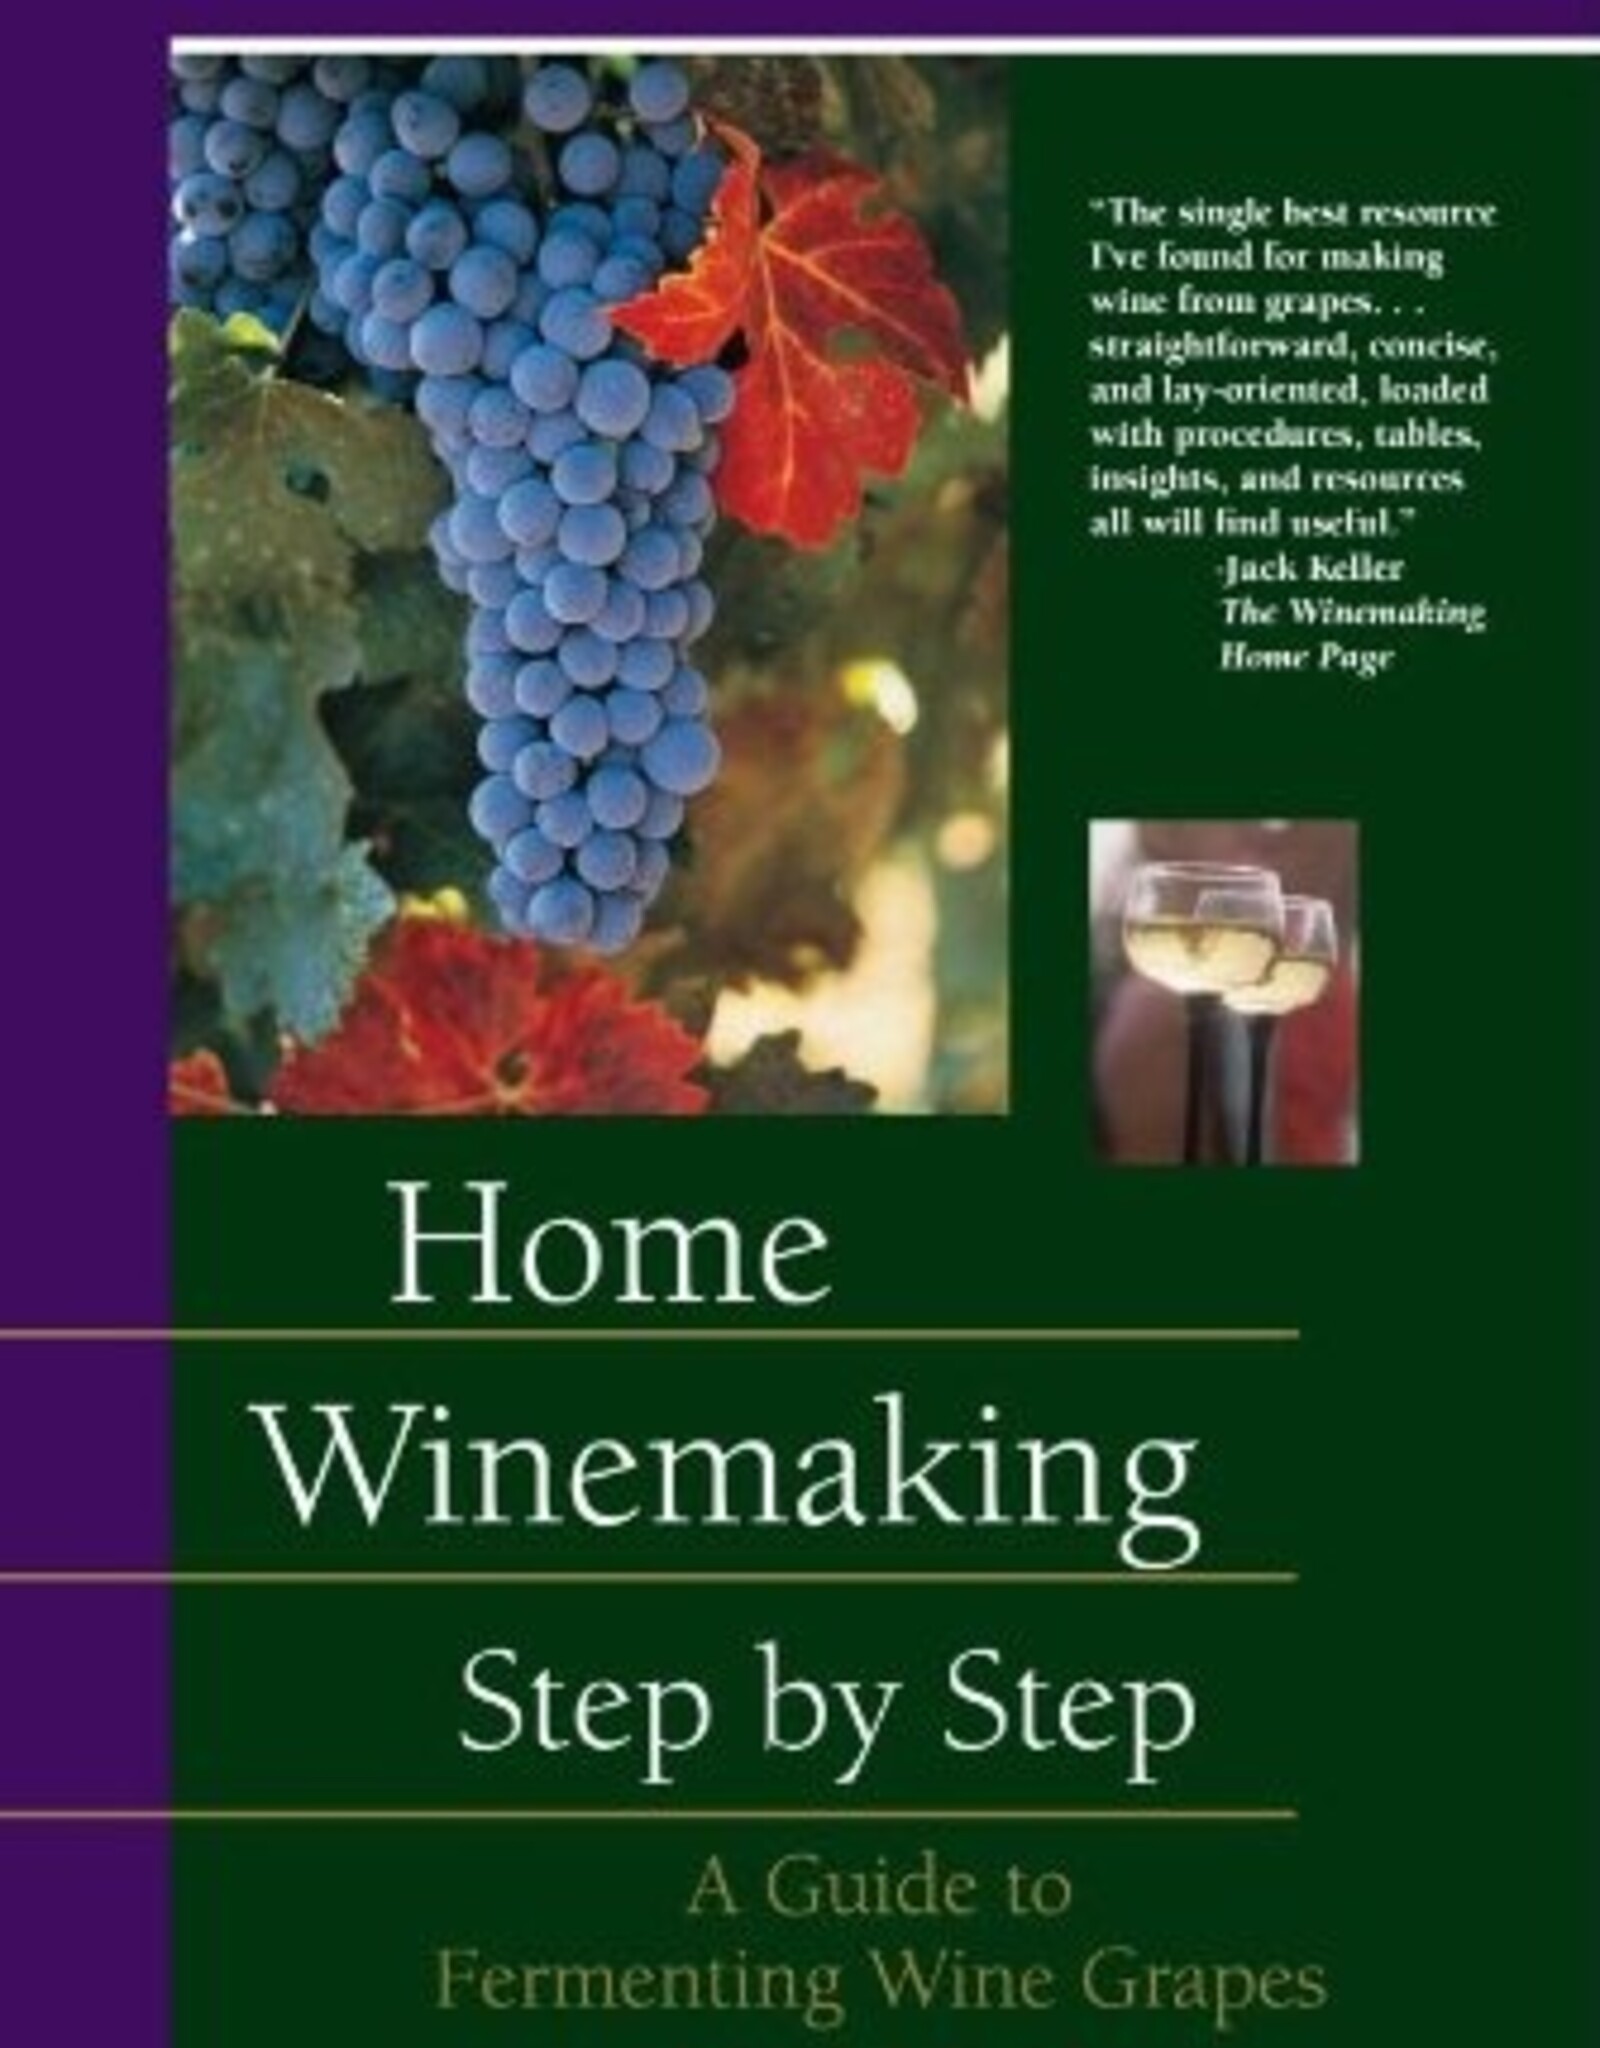 Home Winemaking Step by Step 4th Ed by Jon Iverson